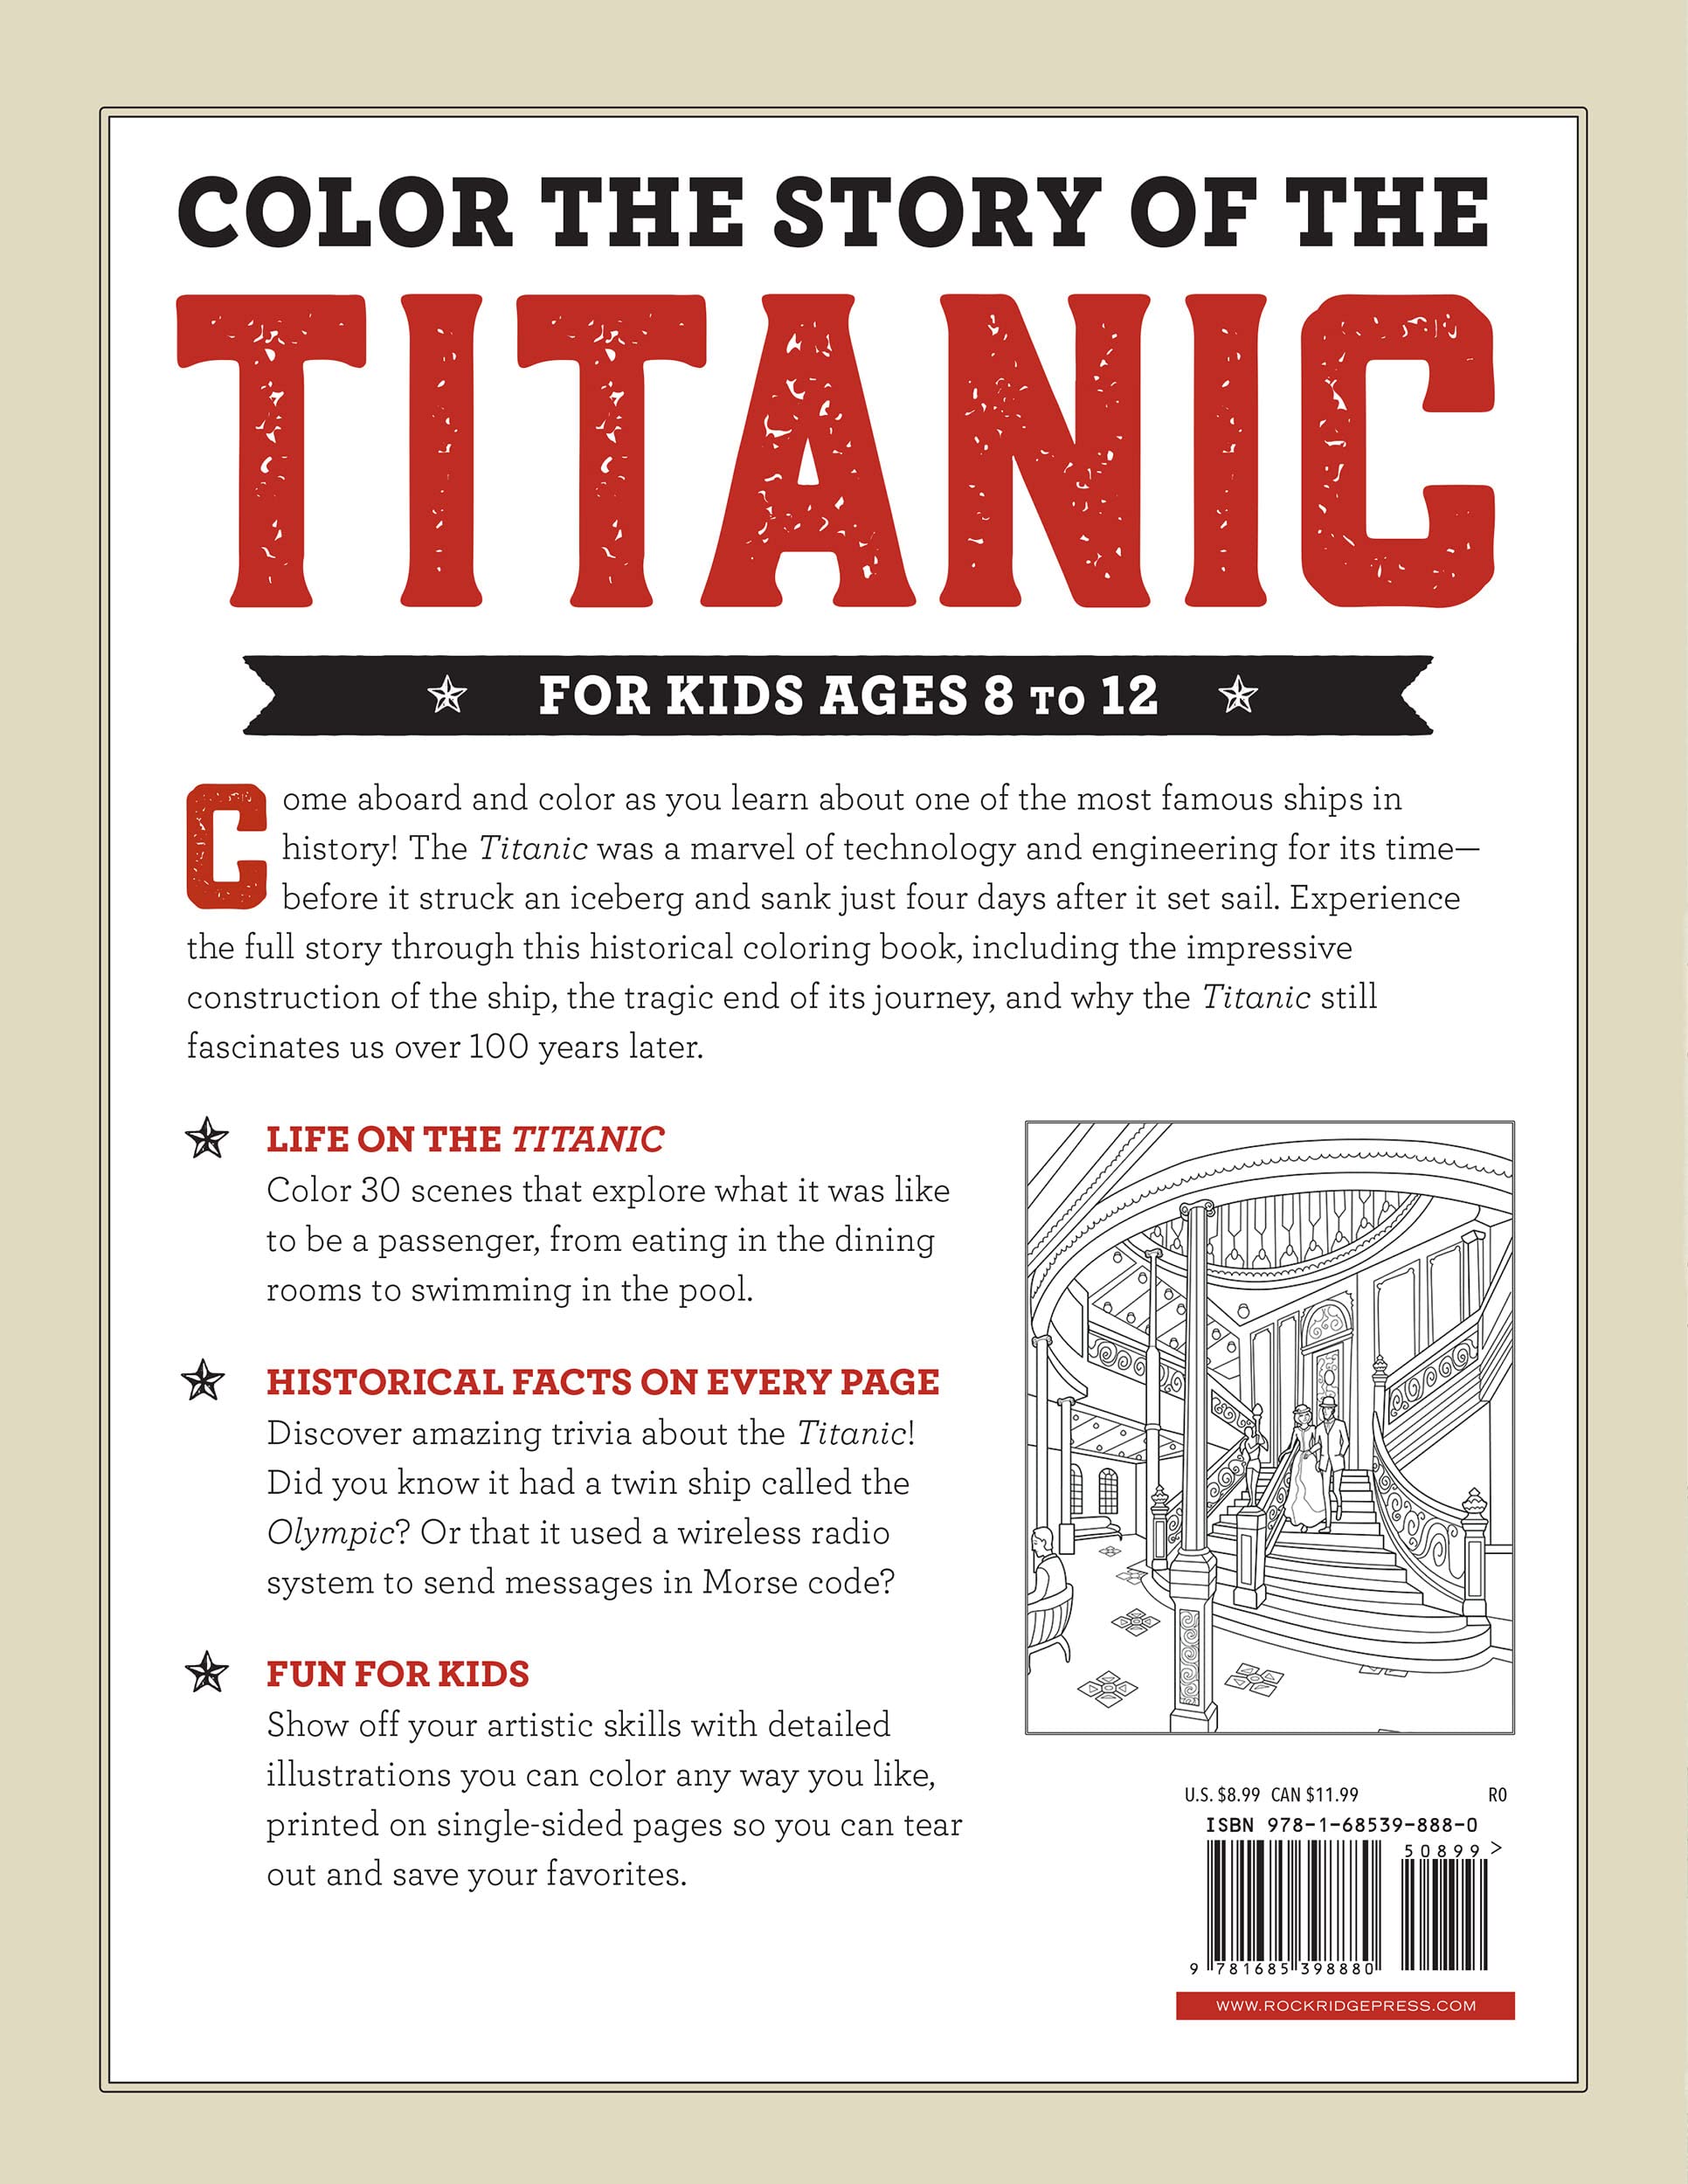 Titanic Coloring Book for Kids: 30 Coloring Activities to Learn About the Titanic